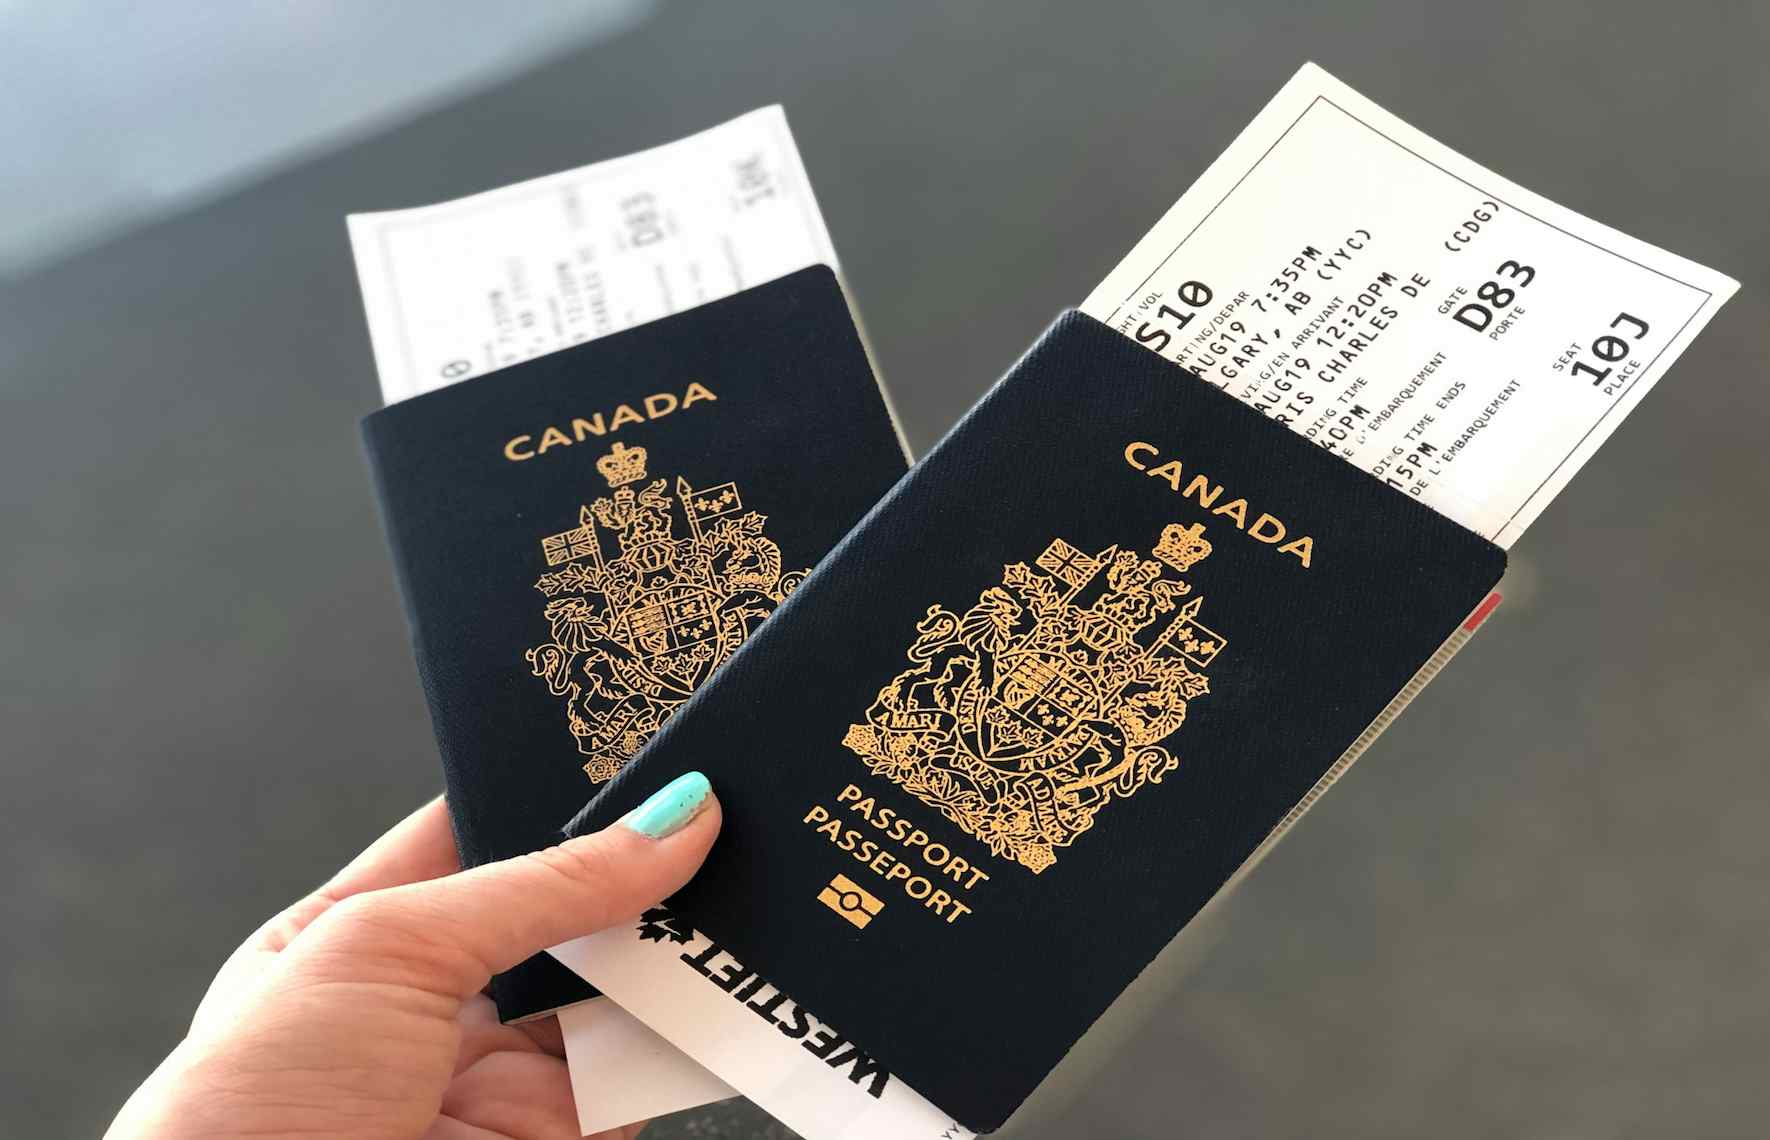 Changes in express entry in Canada